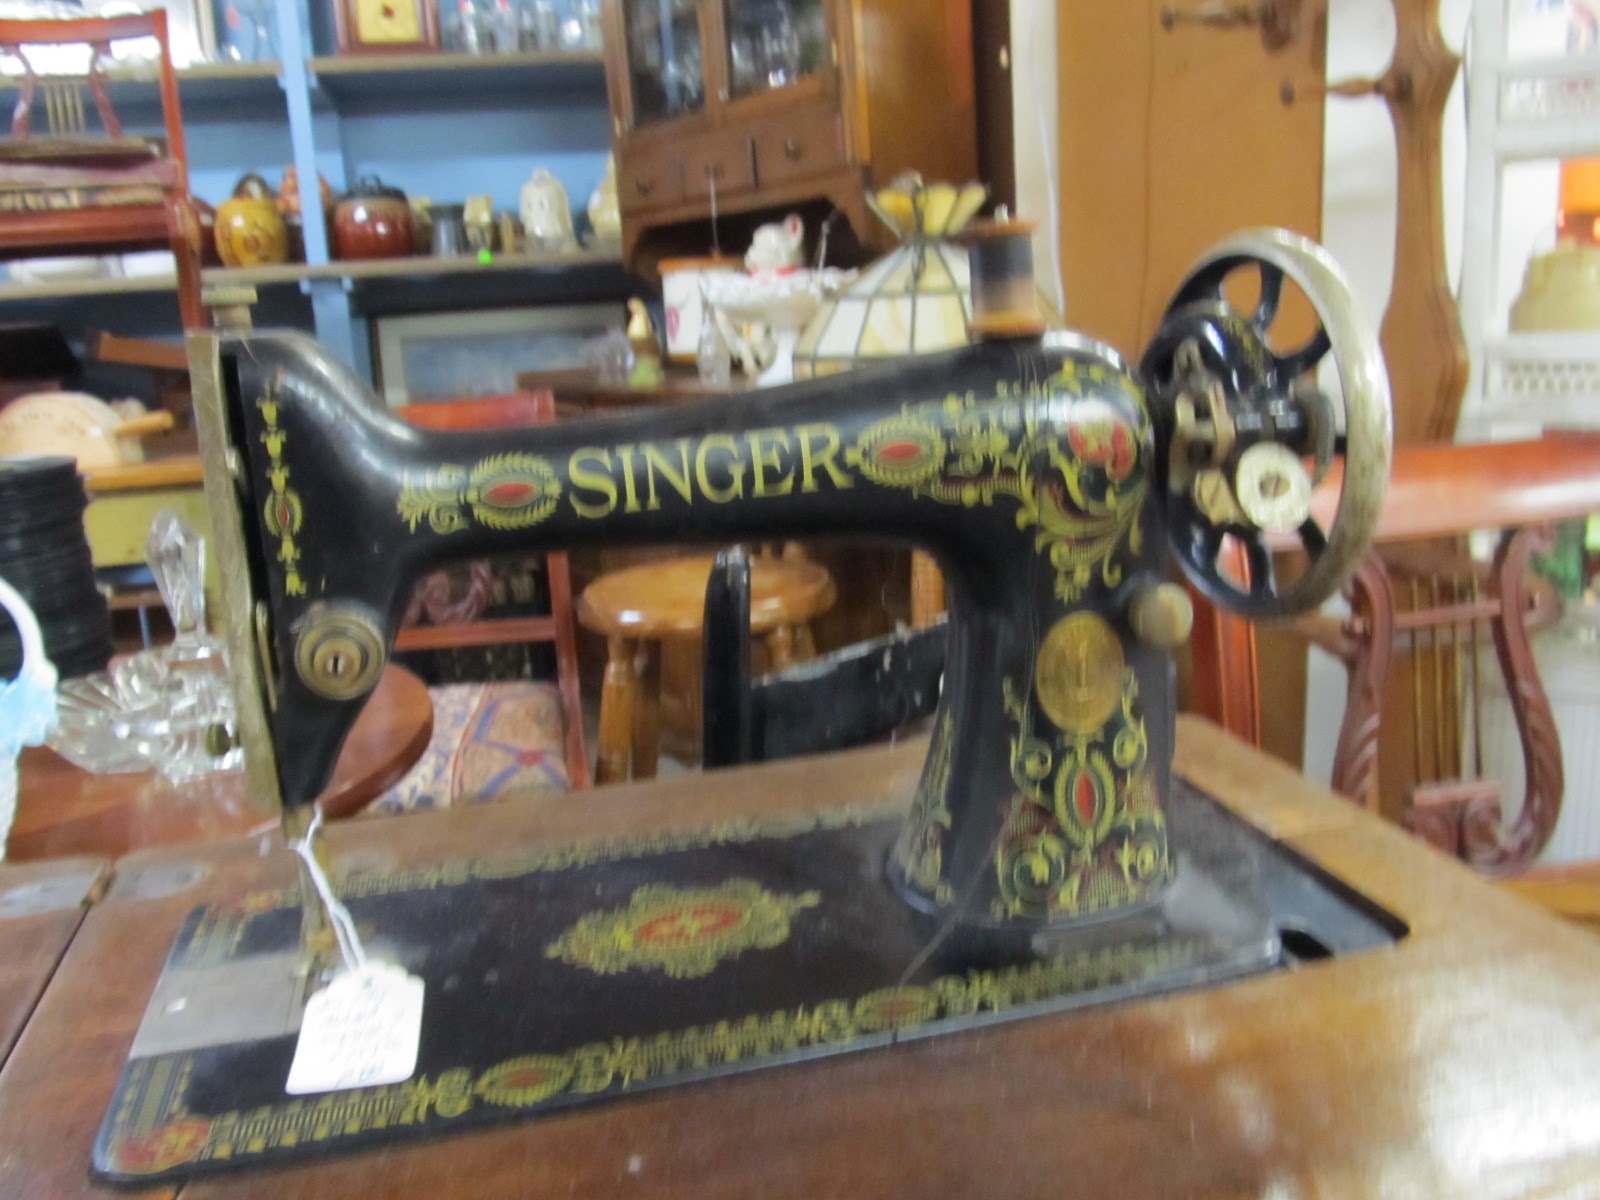 Little Singer Sewing Machine in cabinet